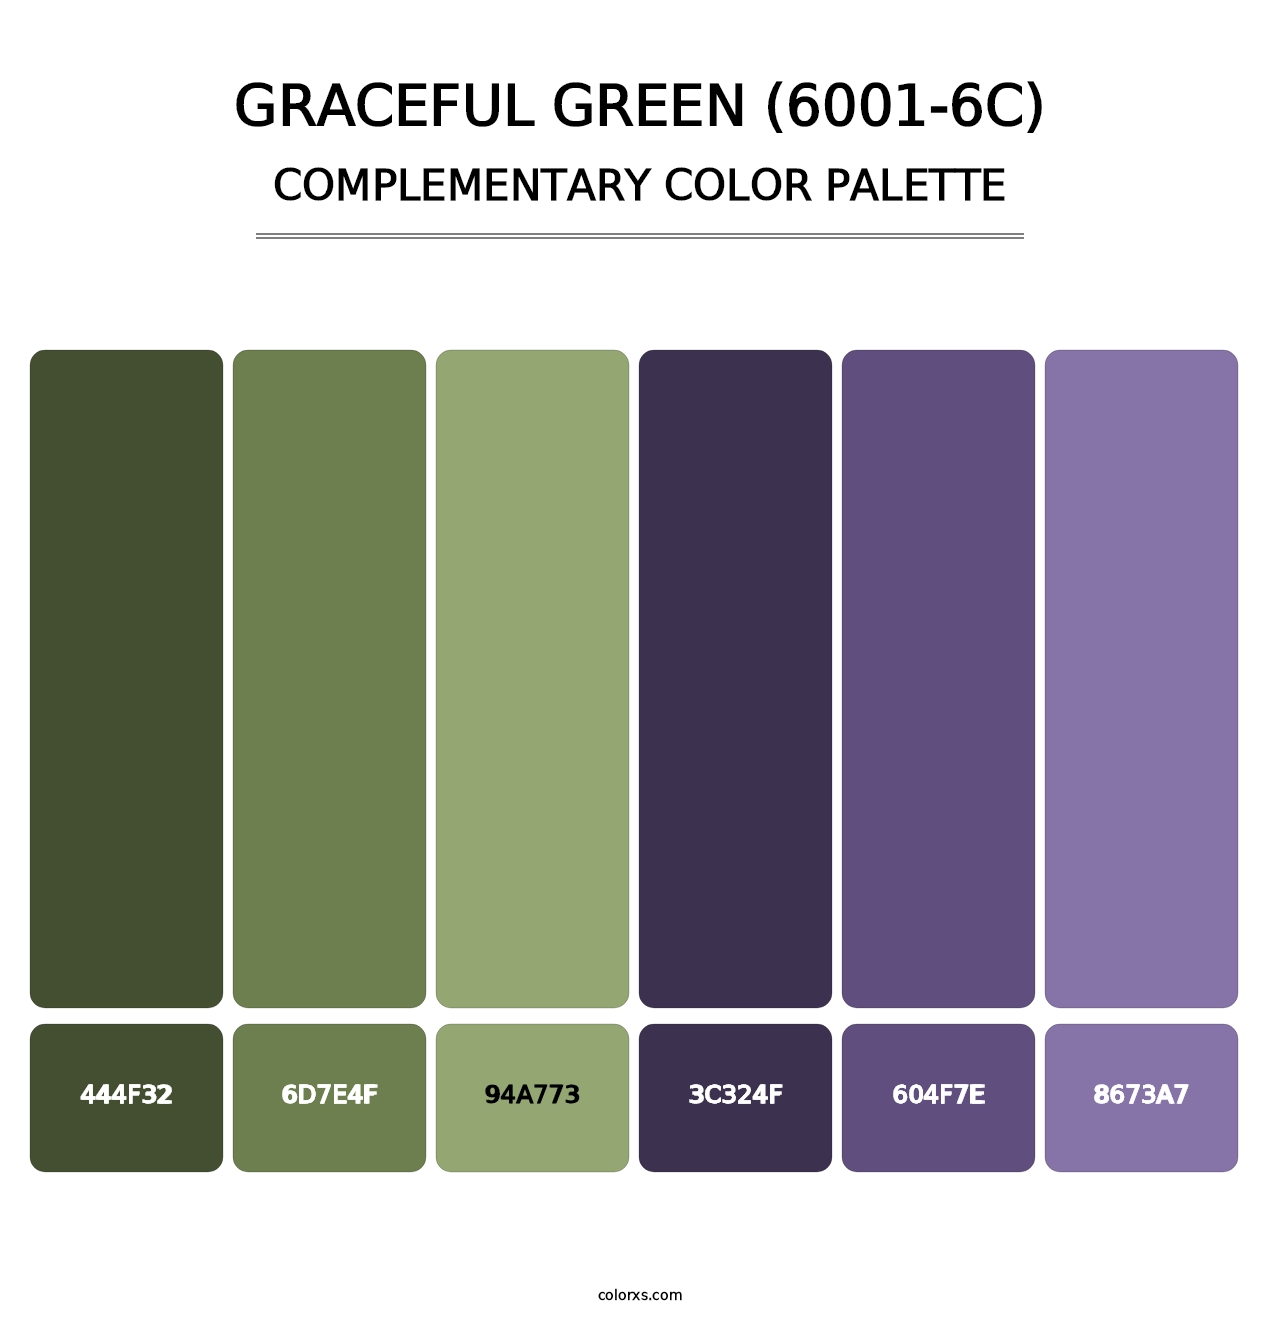 Graceful Green (6001-6C) - Complementary Color Palette